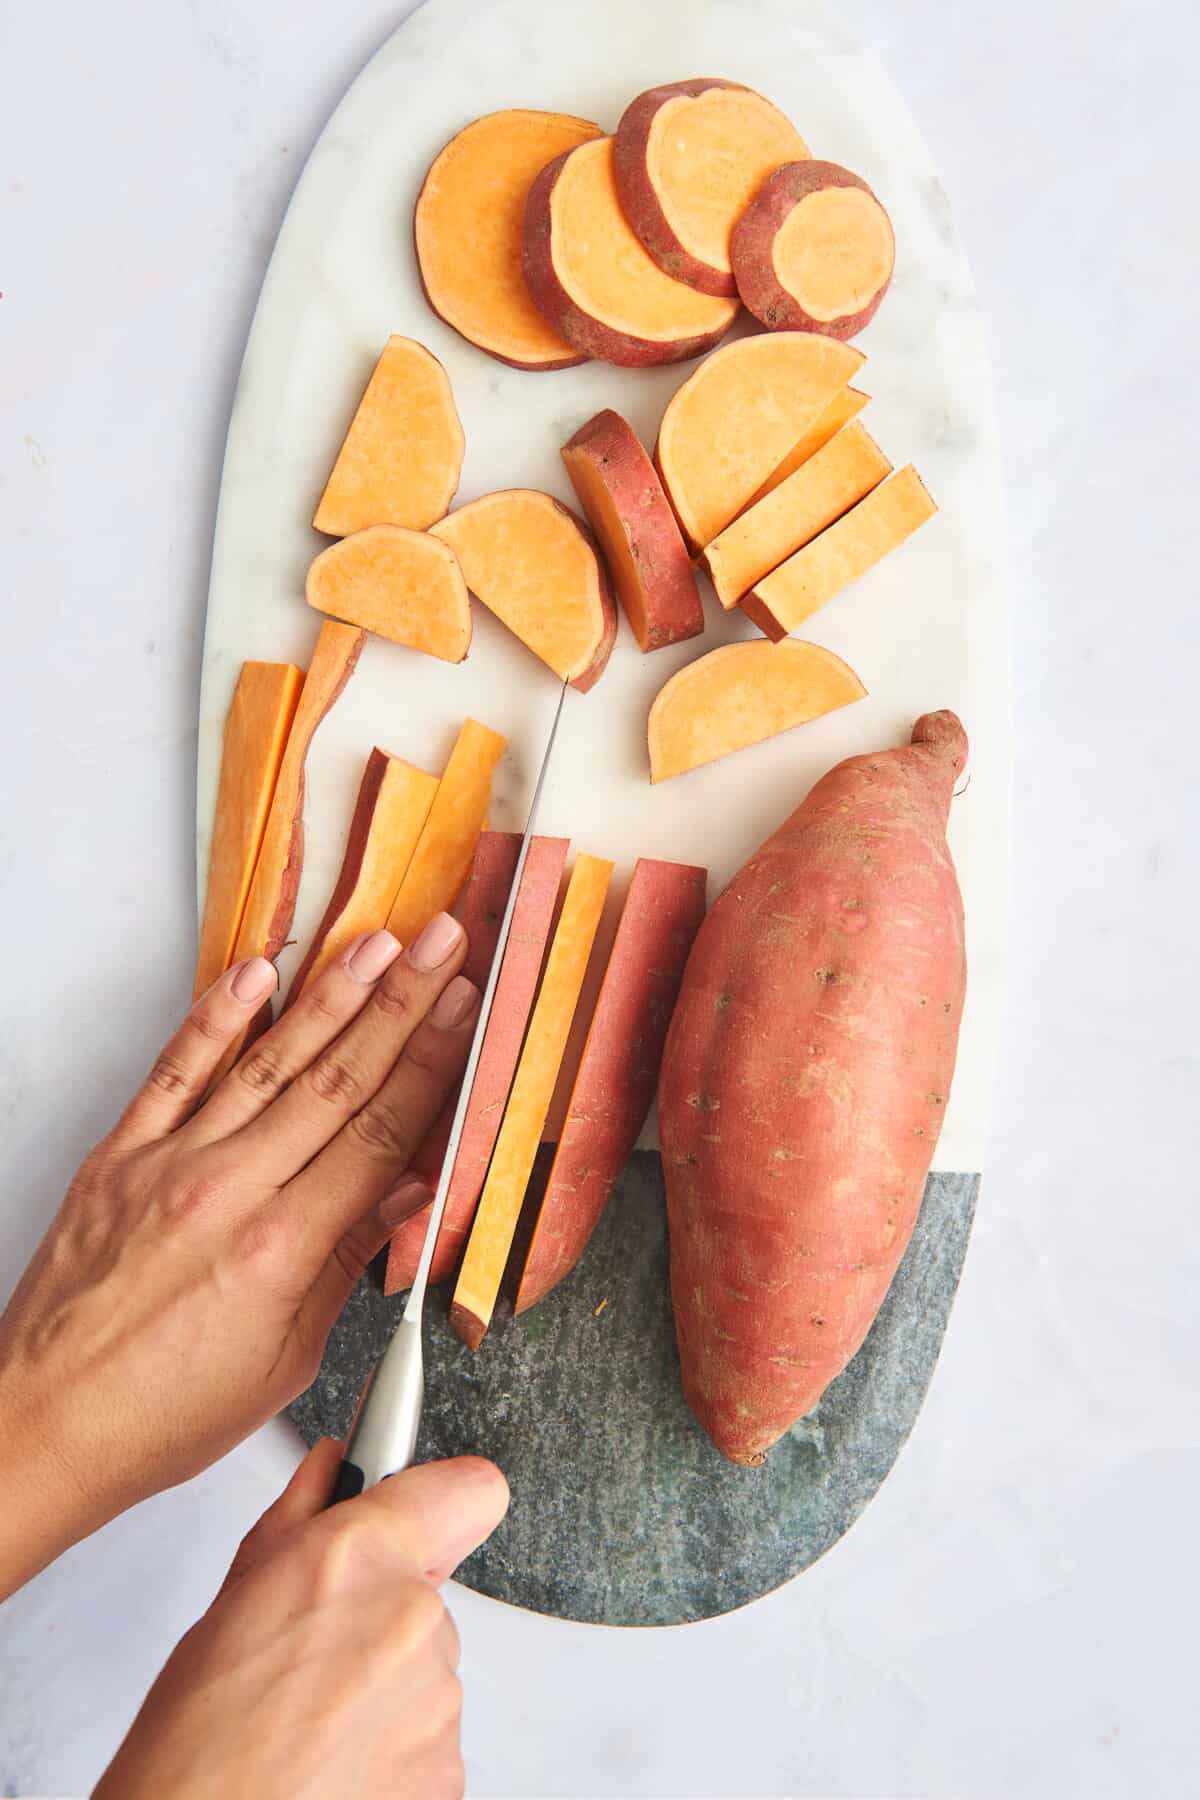 Rounds and quarters of sweet potato next to a whole sweet potato and one being sliced into sticks. 